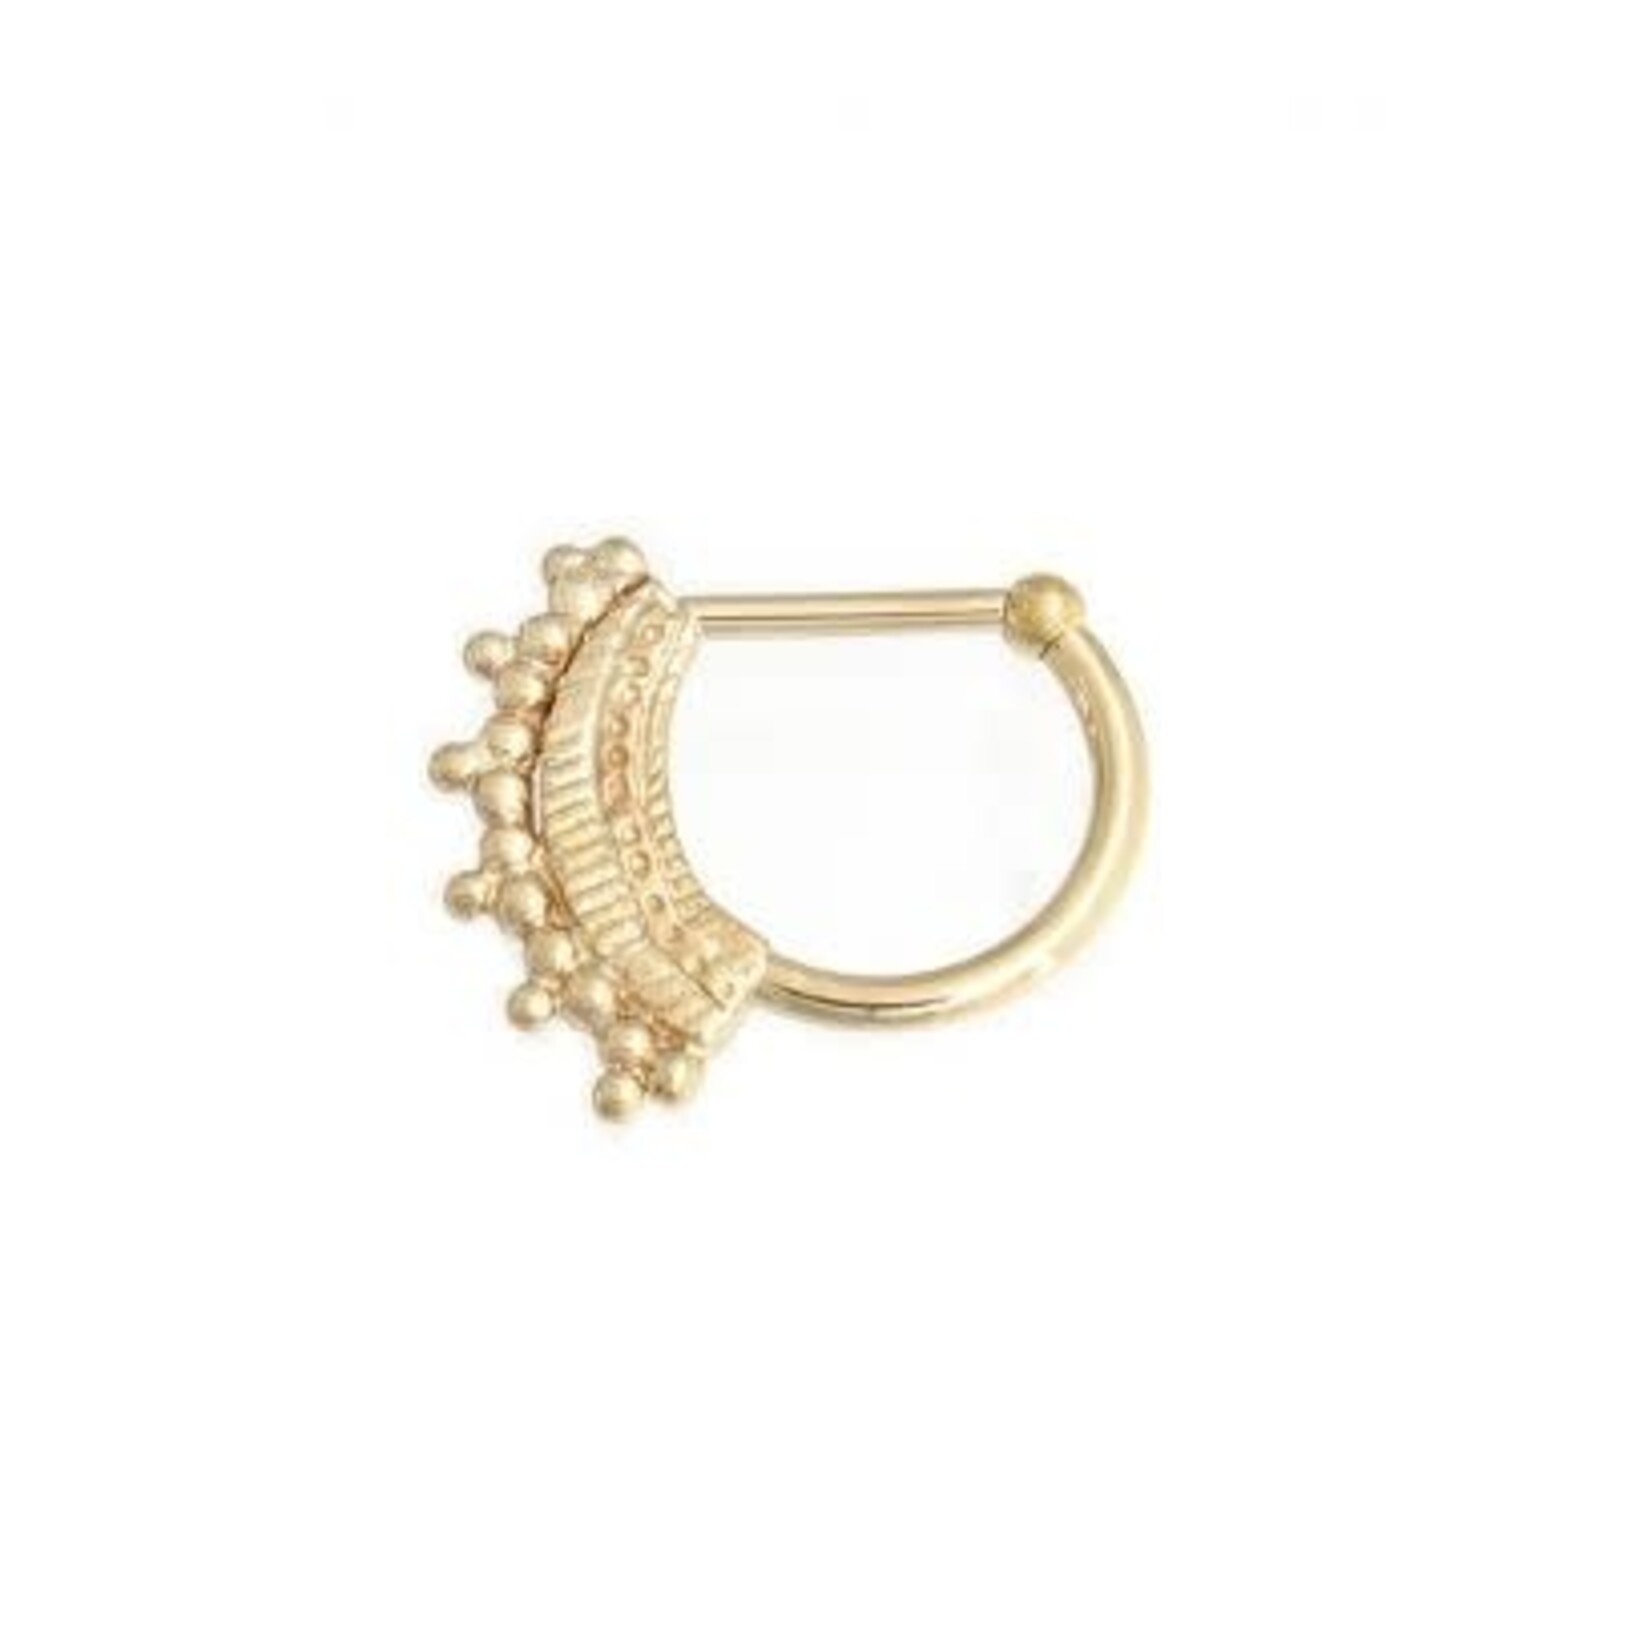 BVLA BVLA 18g "Bethra" Nostril Ring with afghan plate